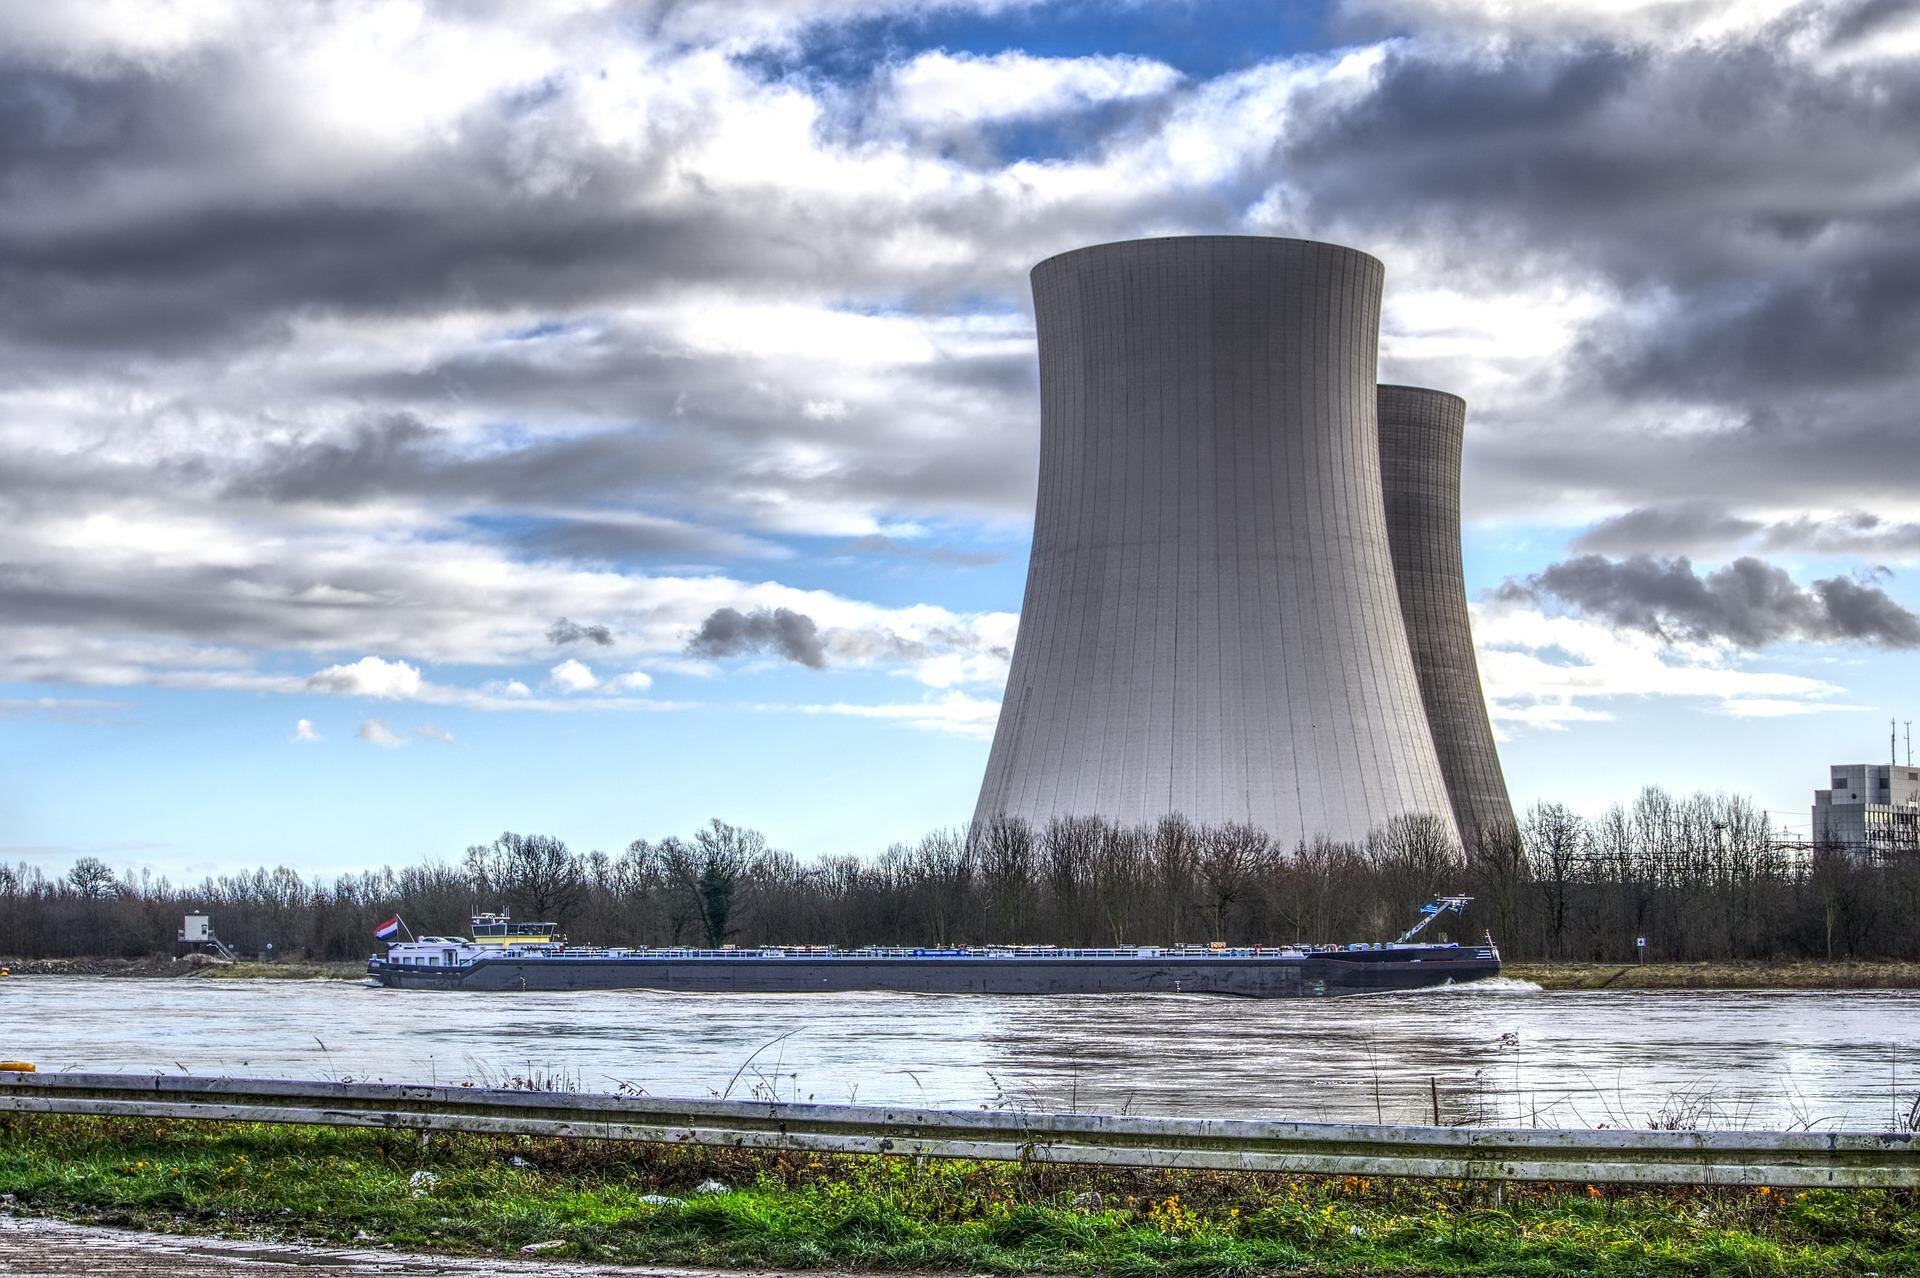 #Nuclear power has merits, but investing in renewable ensures long-term energy security, renewable energy expert says